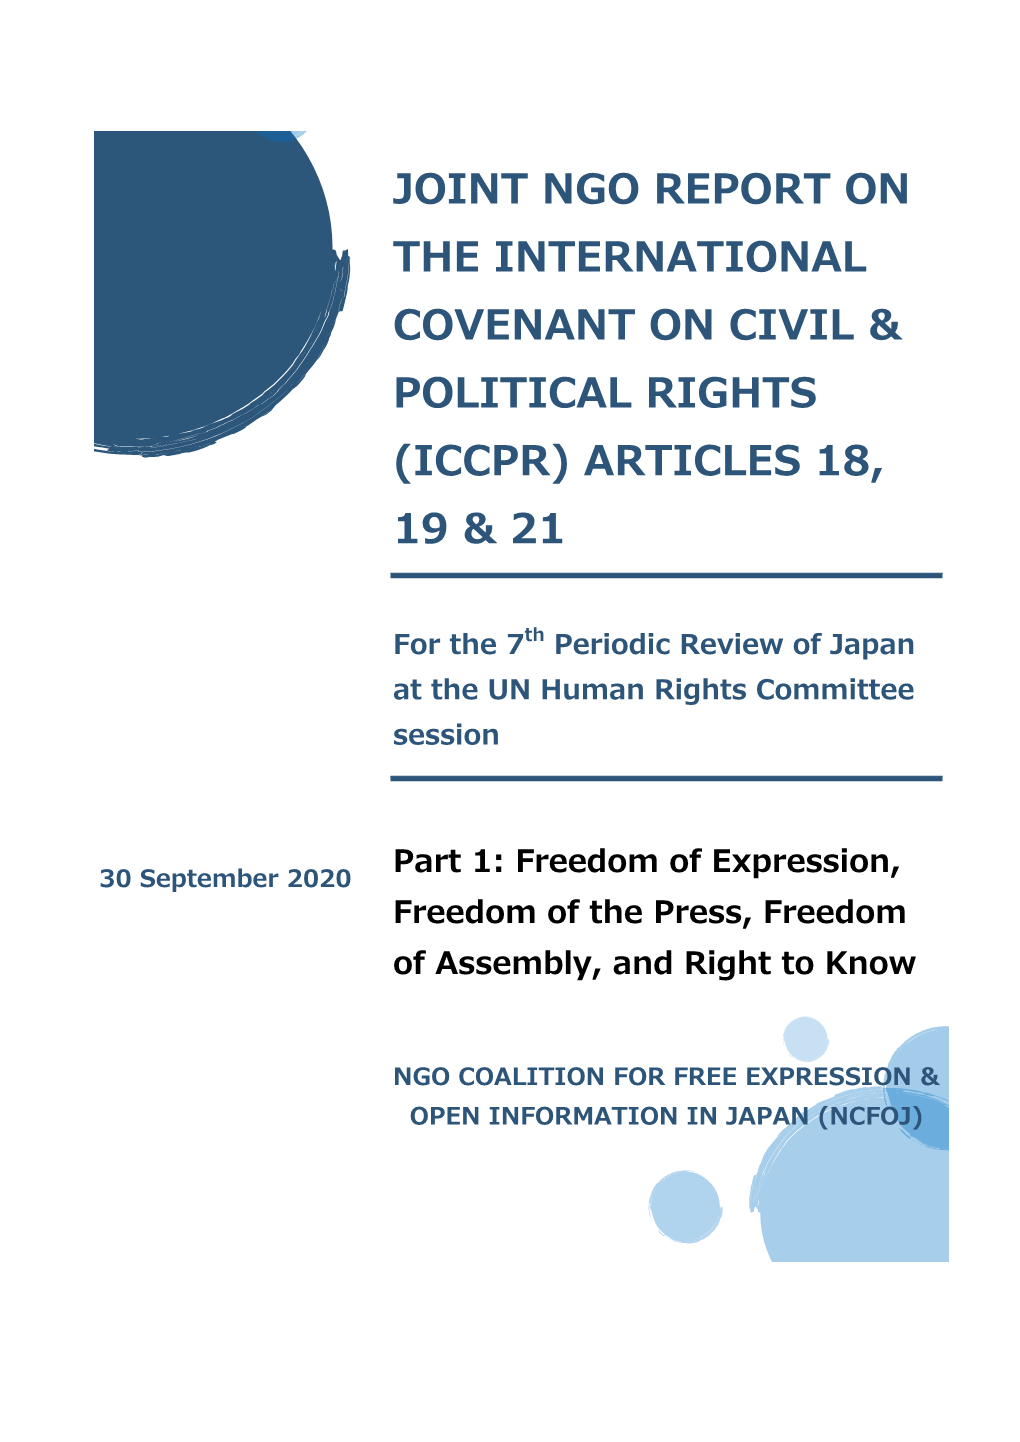 Joint Ngo Report on the International Covenant on Civil Political Rights